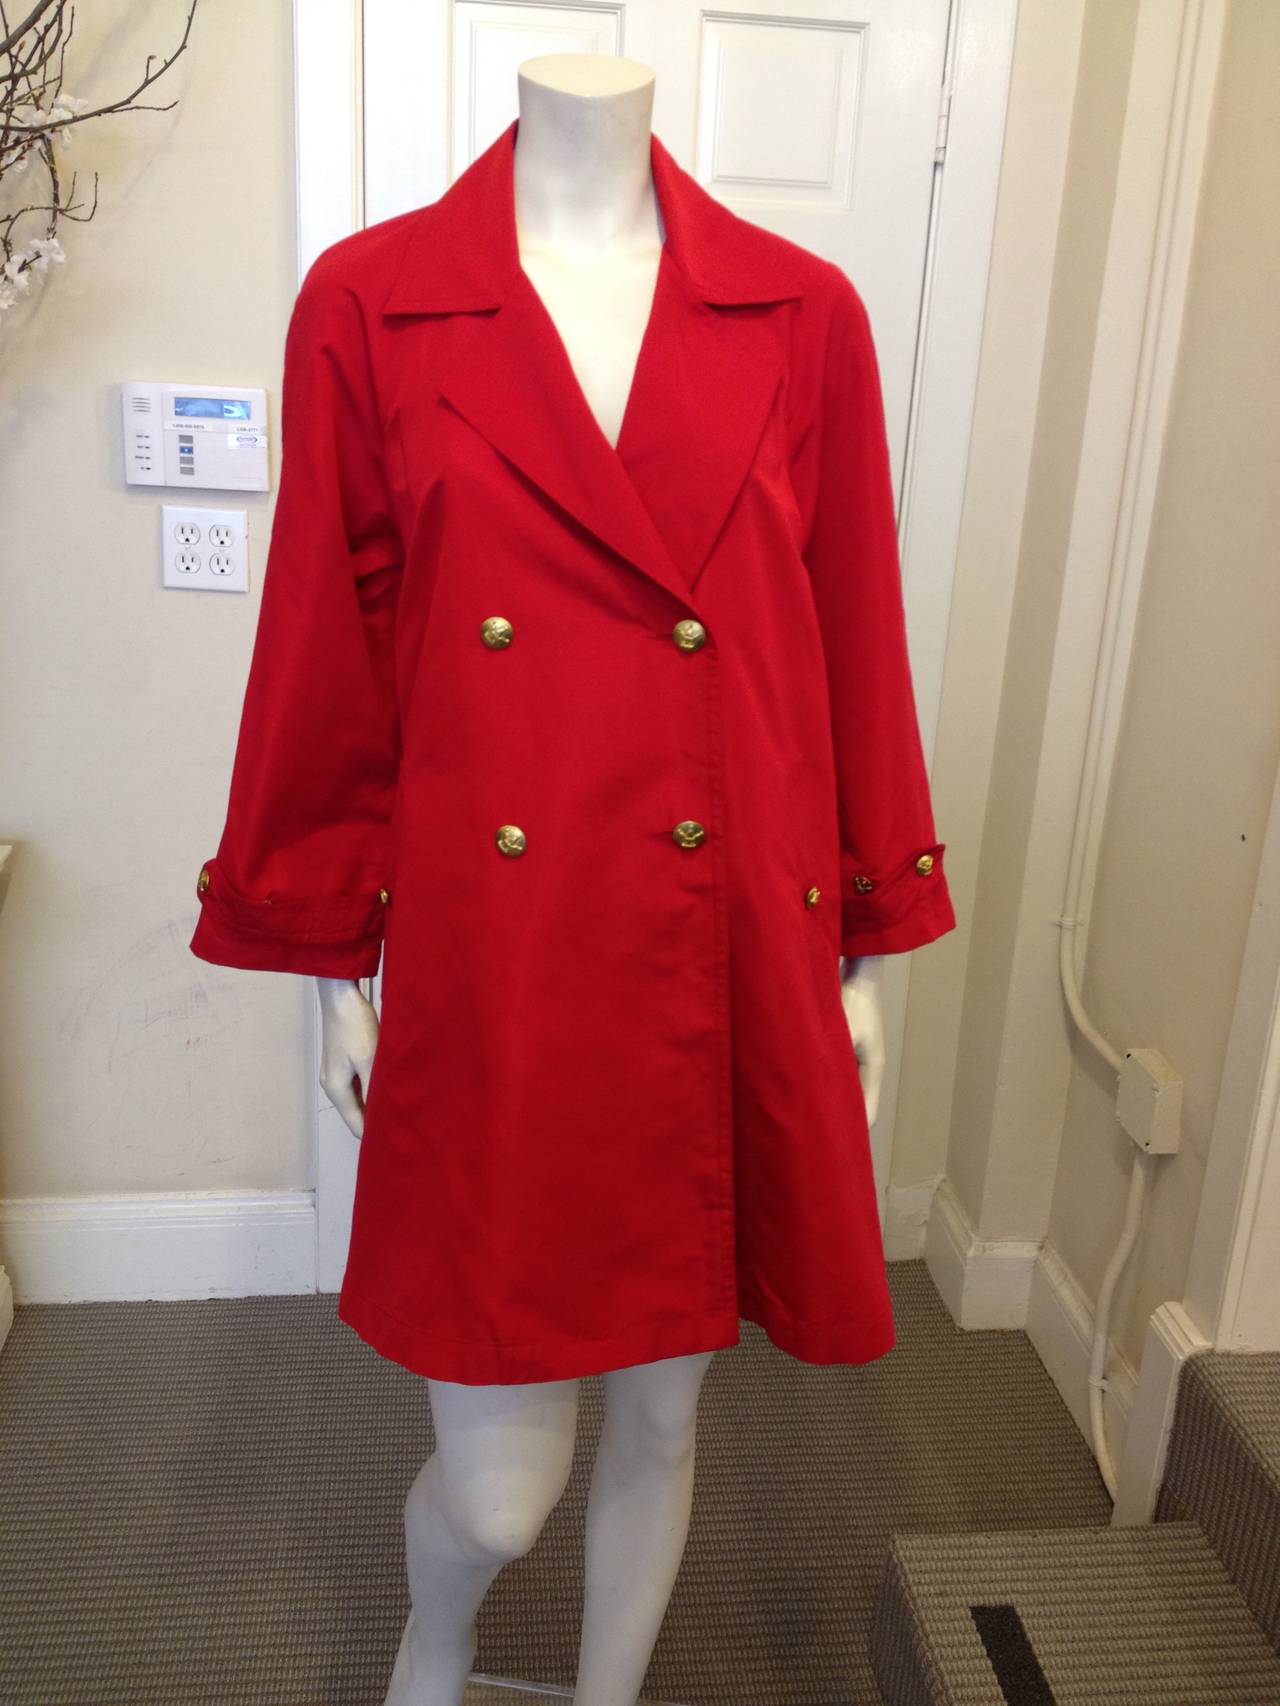 This eyecatching Chanel coat features a beautiful a-line shape for an elegant and feminine fit, and is rendered in a bright carmine red silk twill material.  It's light enough to wear as a duster during the day, while the semi-glossy sheen makes it